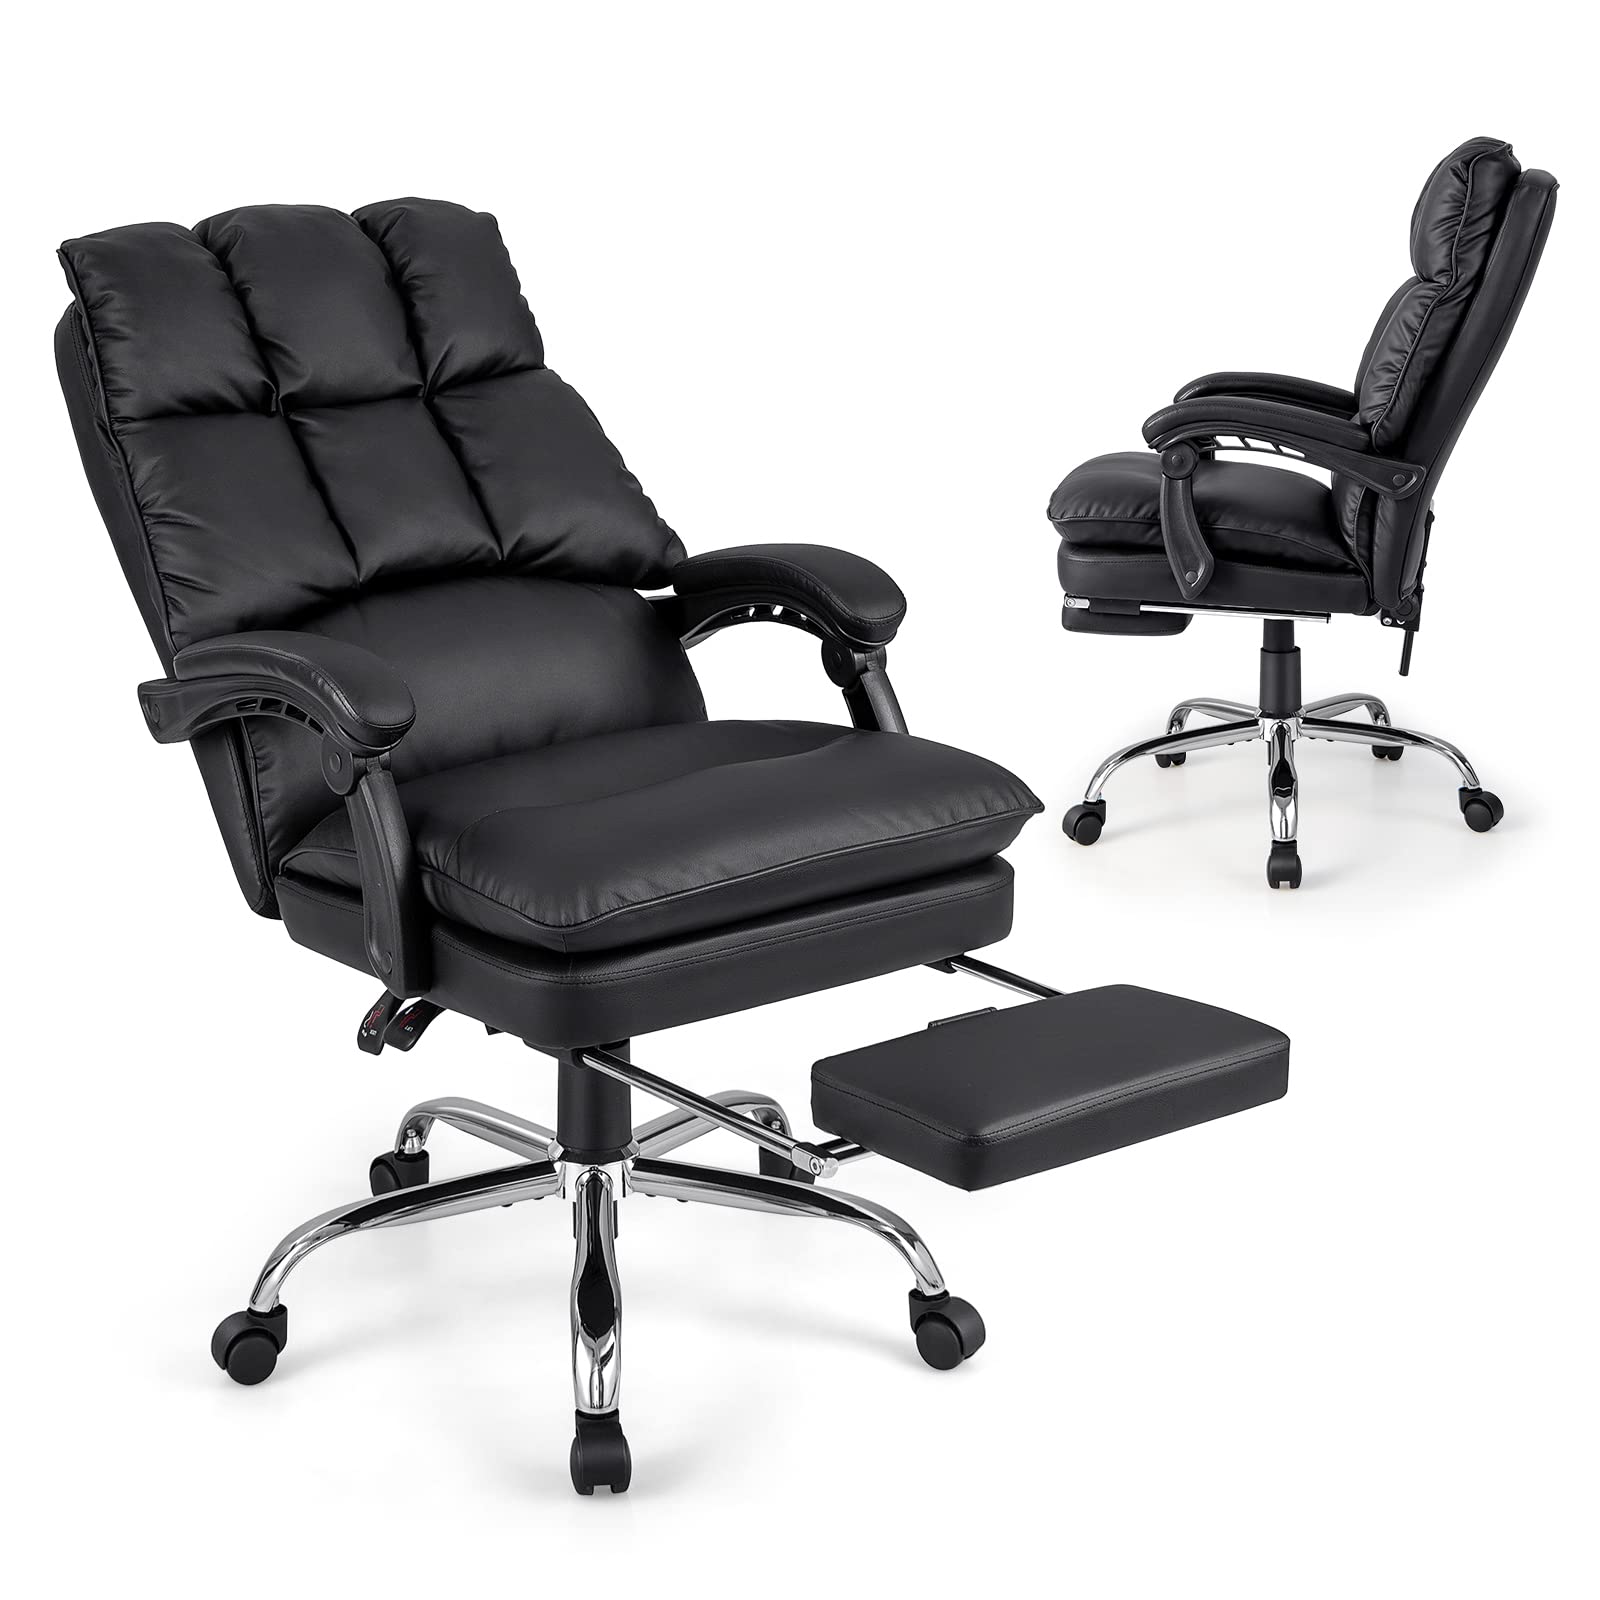 Giantex Executive Office Chair, PU Leather Reclining Chair with Retractable Footrest & Padded Armrests (Black)